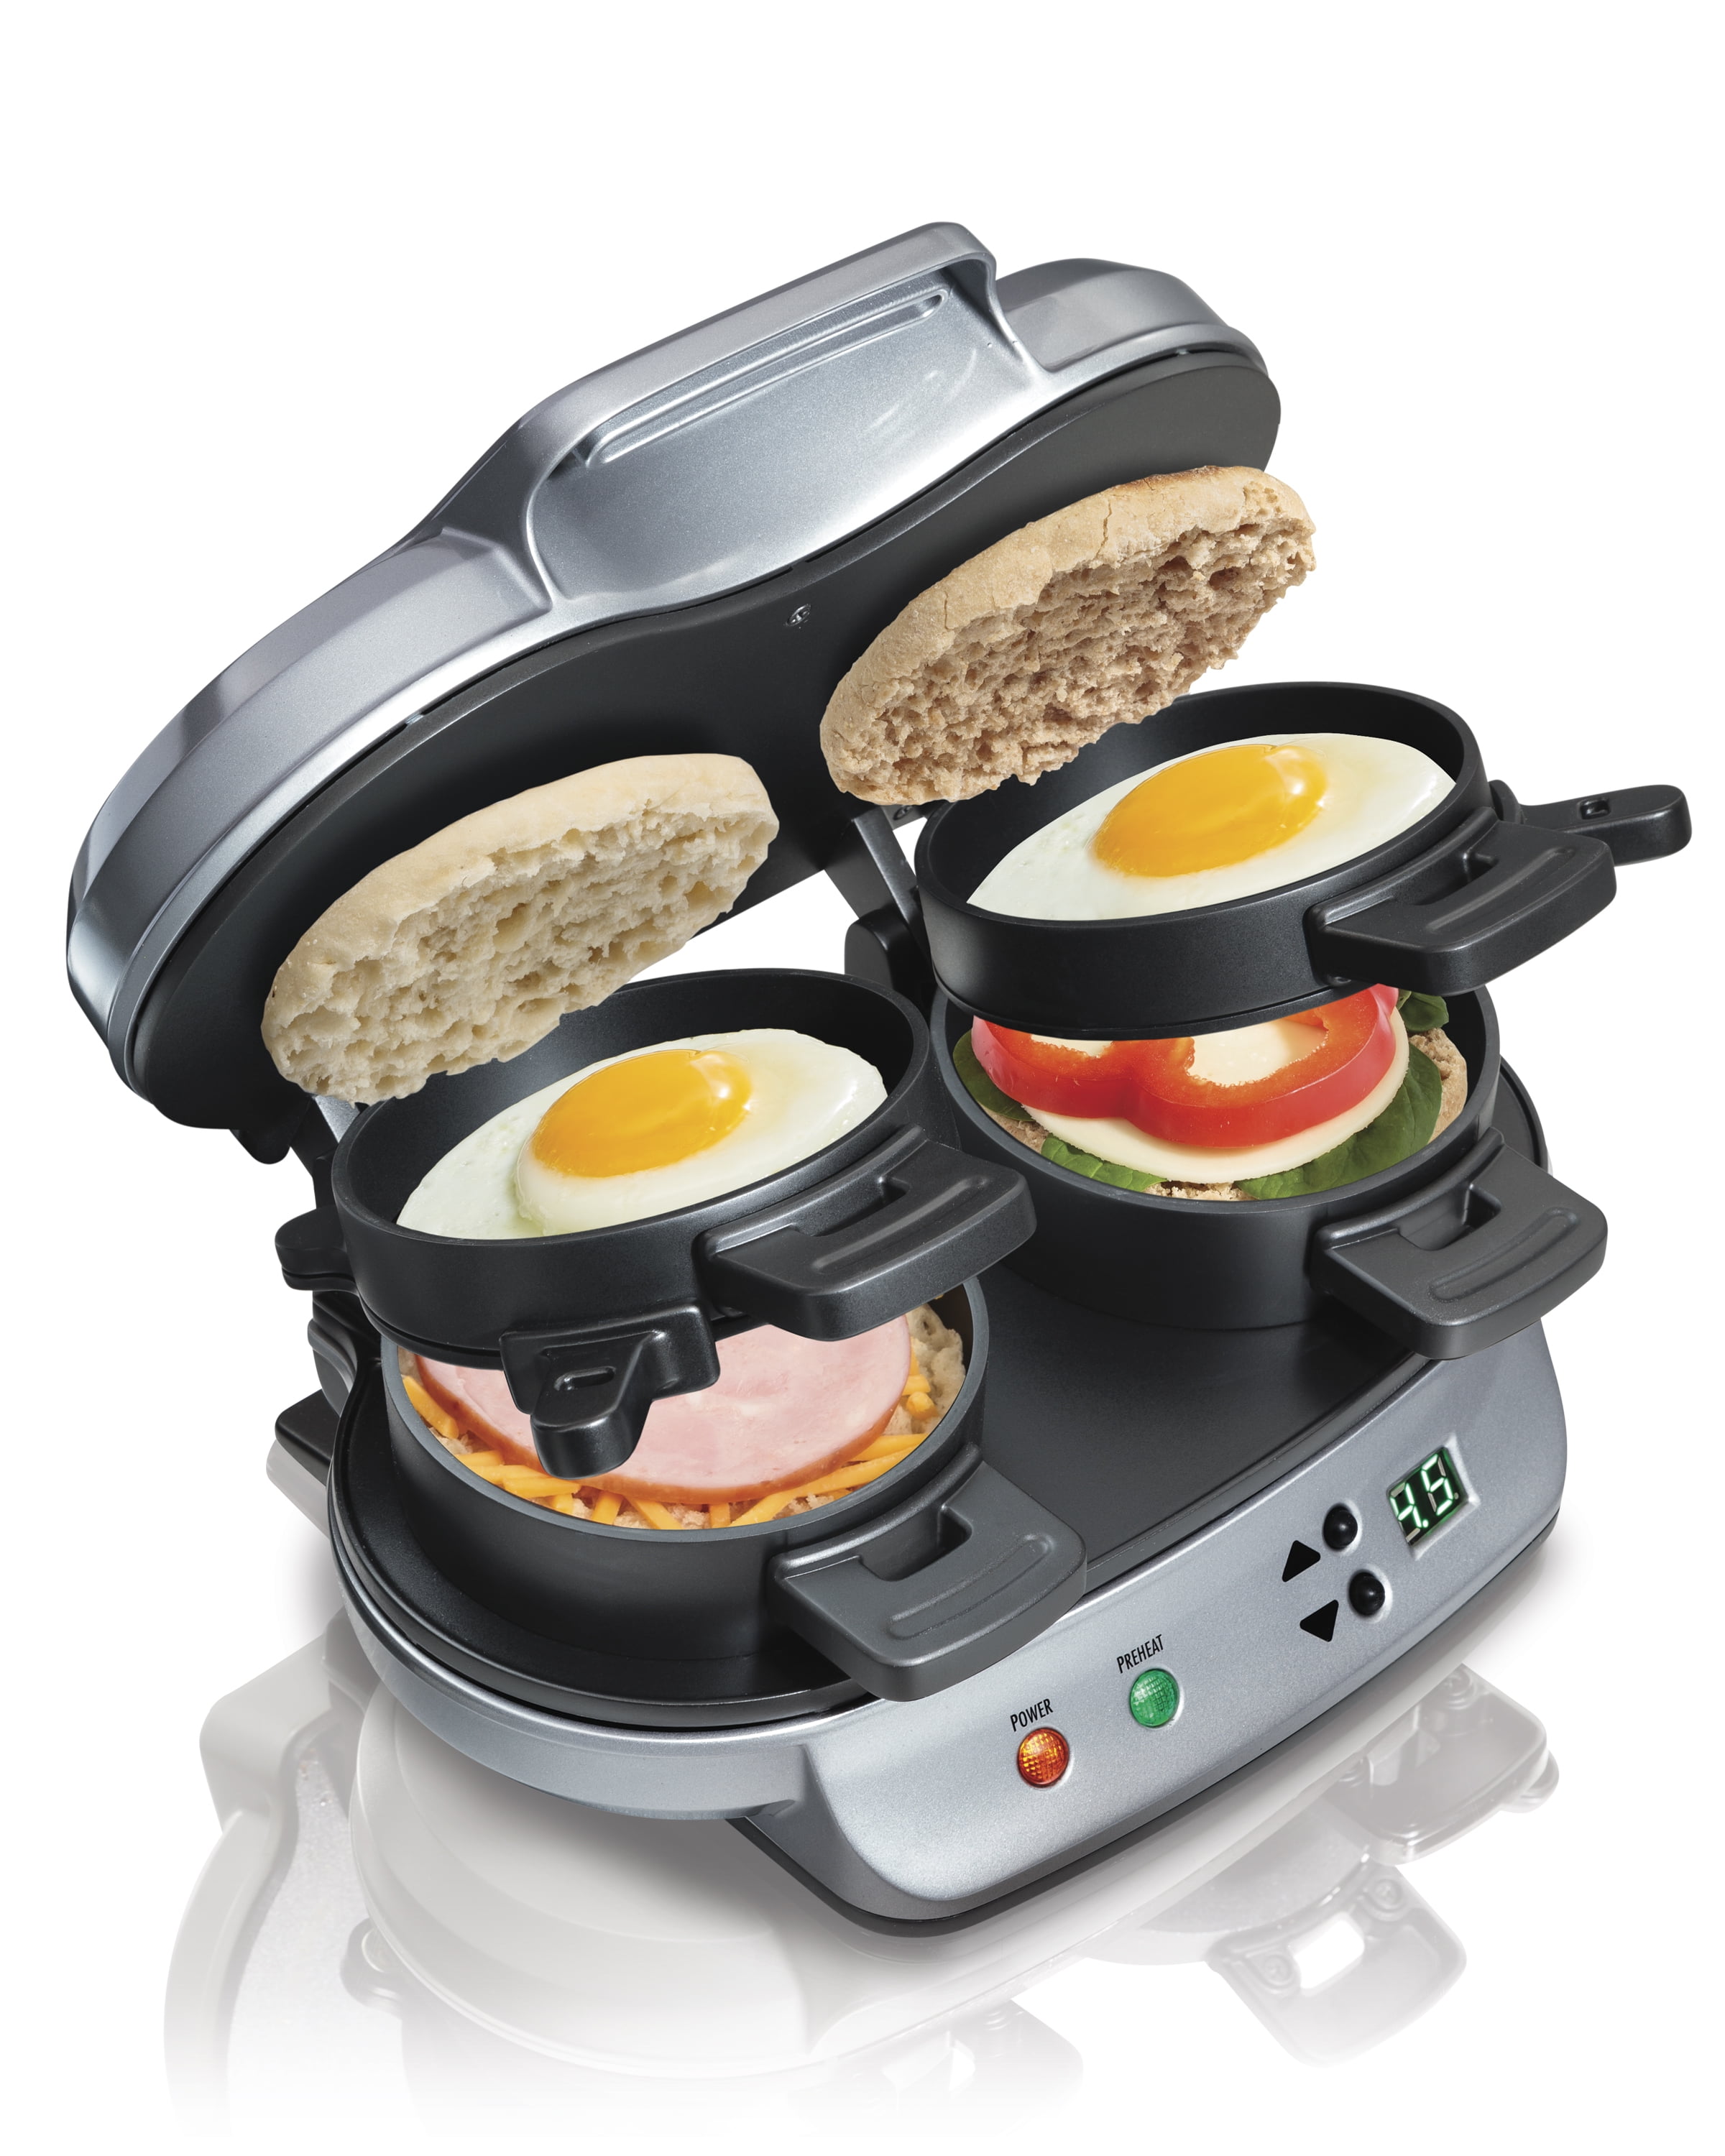 This Hamilton Beach Breakfast Sandwich Maker Is So Easy To Use